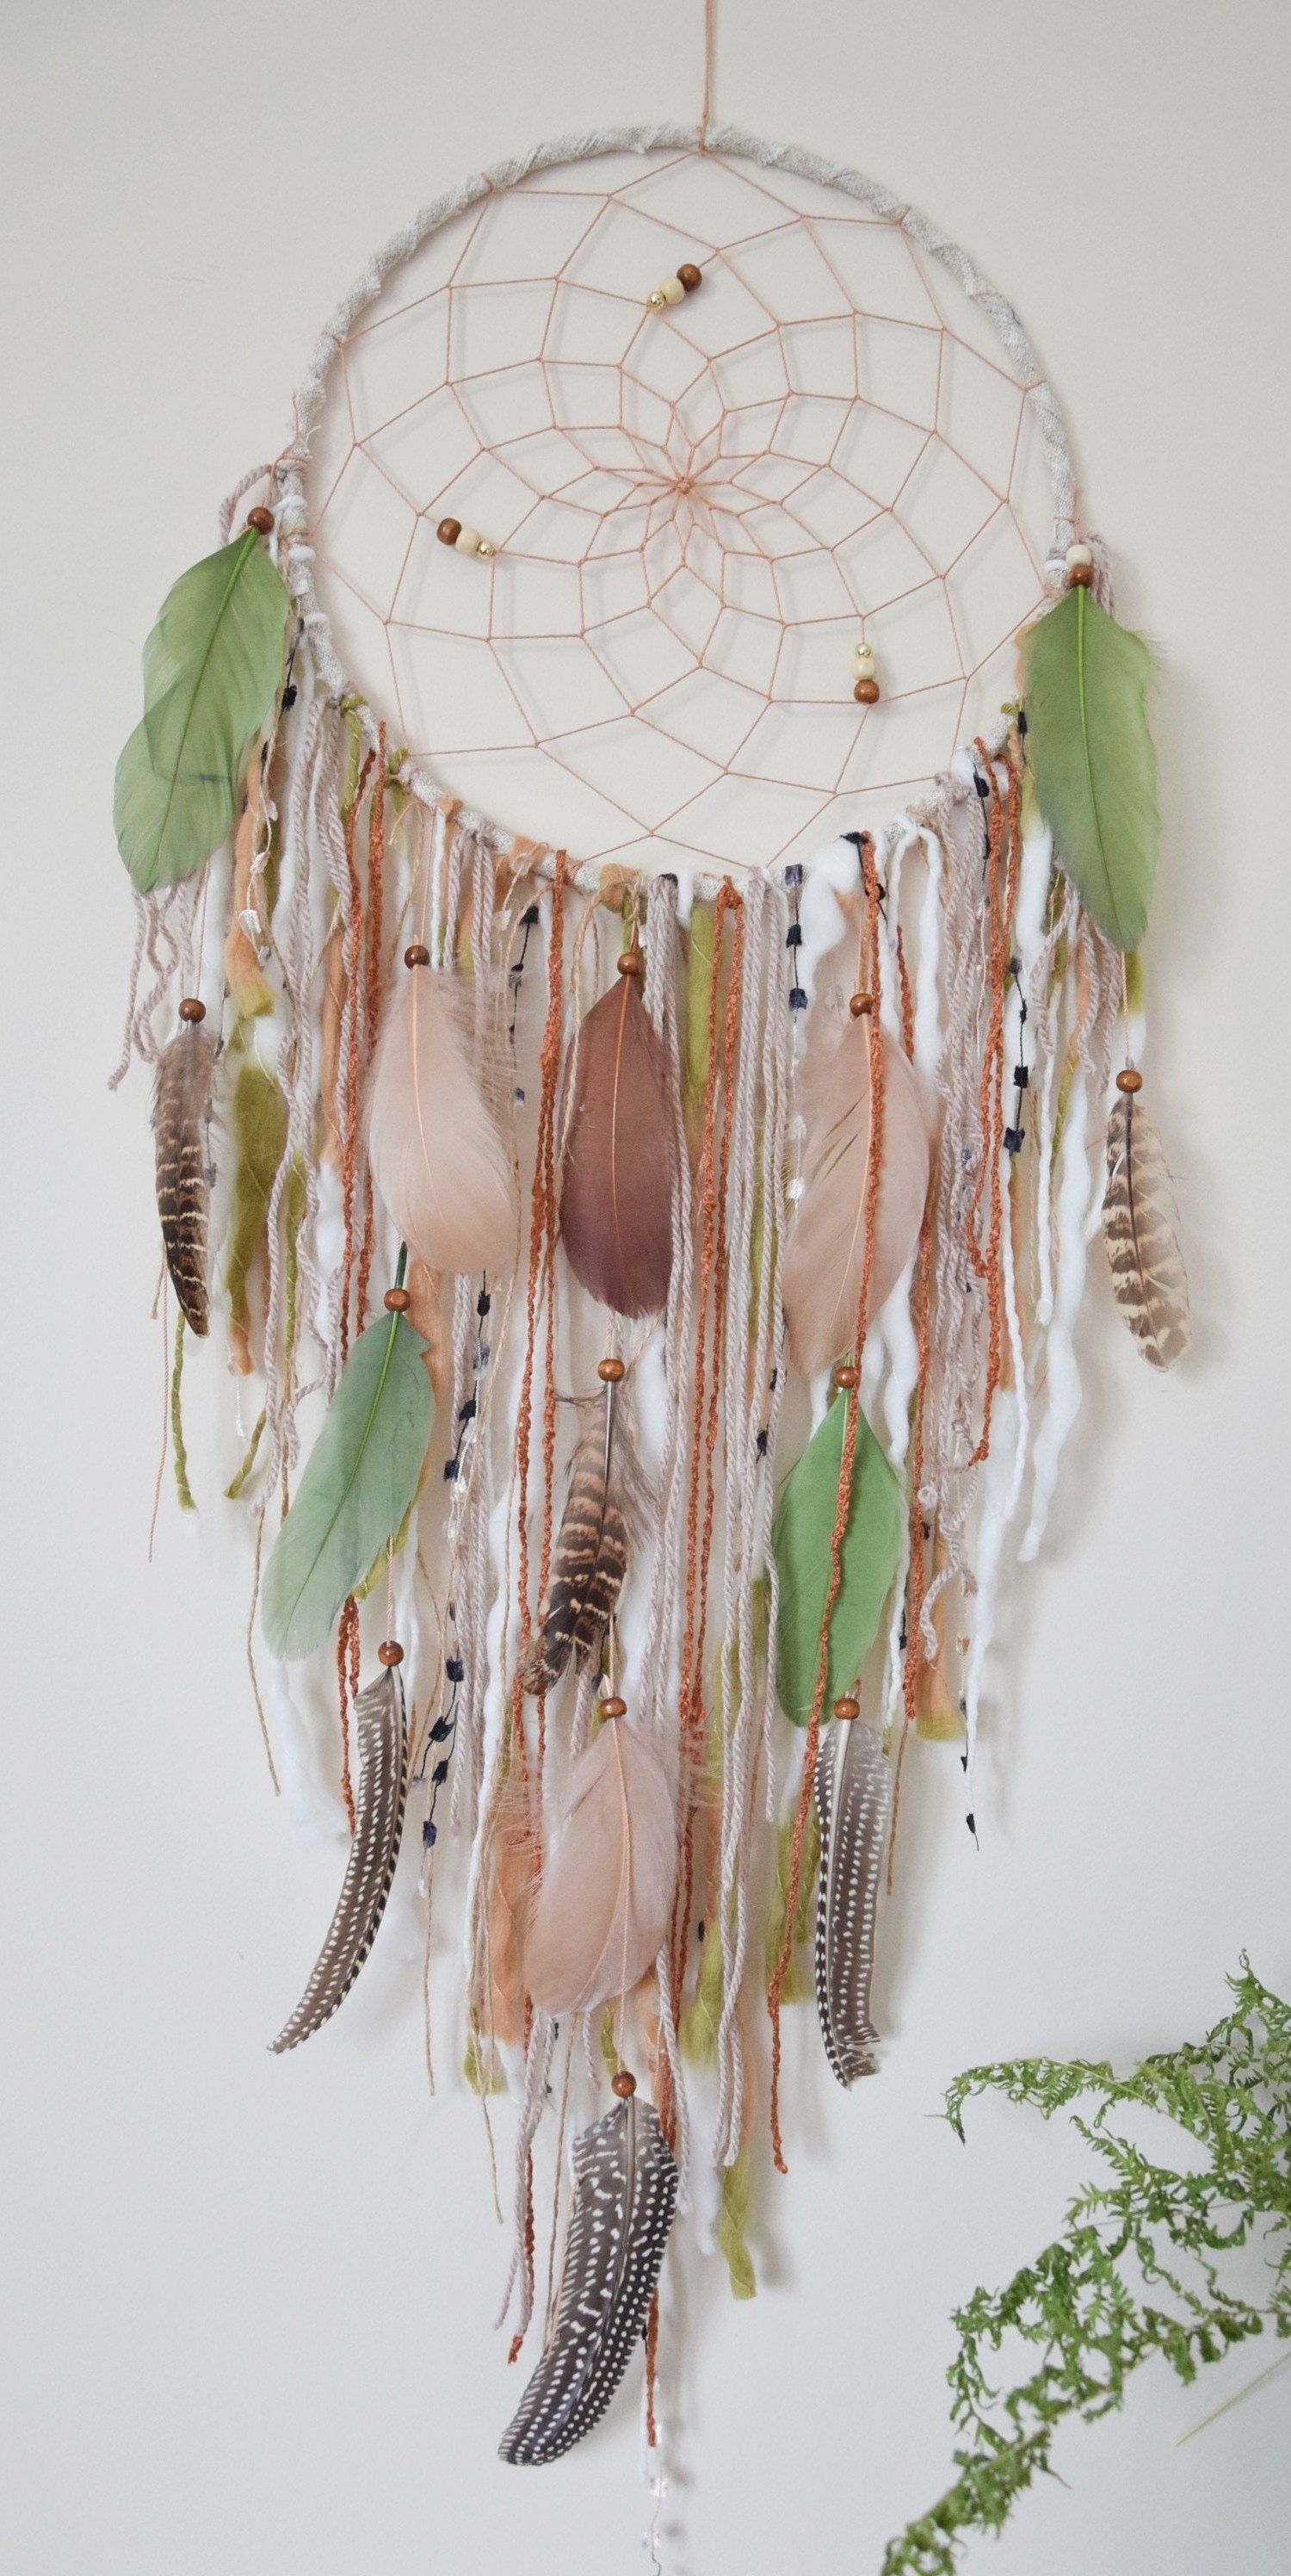 Rustic Large Dreamcatcher Wall Hanging Dream Catcher Boho Feathers Wall Tapestry - Rustic Large Dreamcatcher Wall Hanging Dream Catcher Boho Feathers Wall Tapestry -   18 diy Dream Catcher bohemian ideas